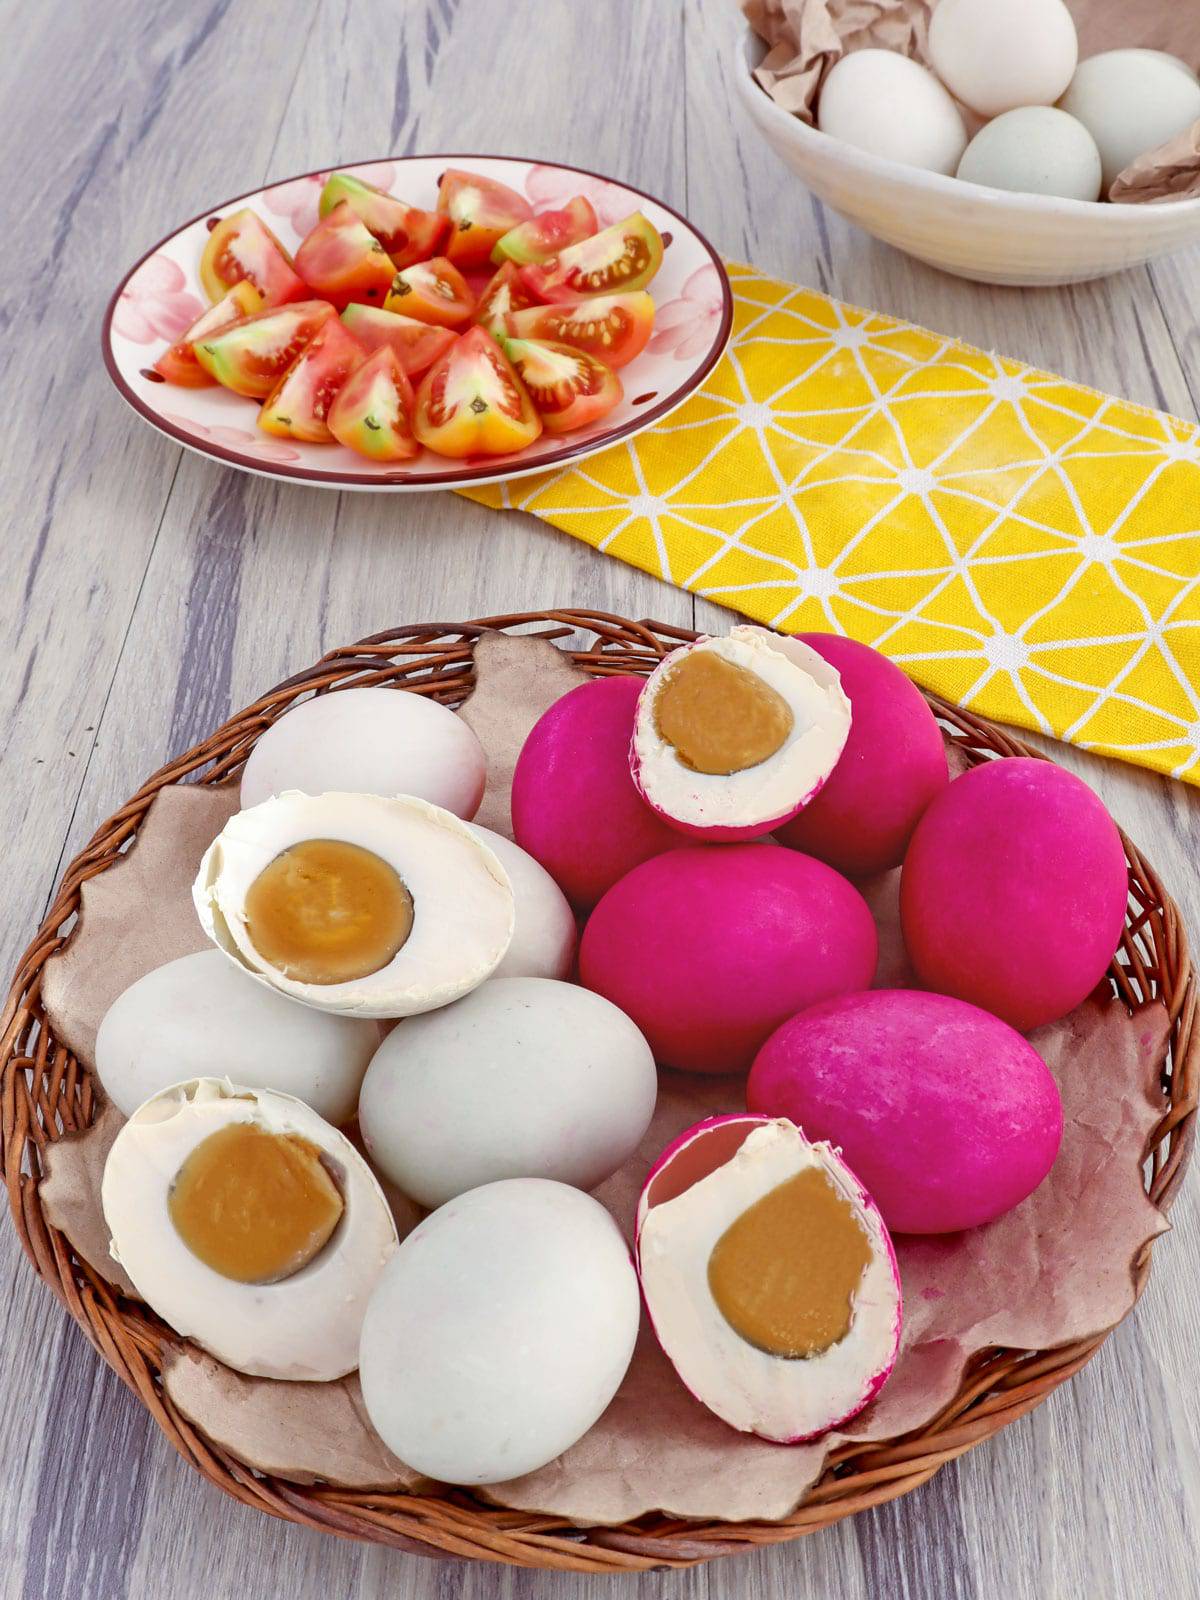 Delicious fresh duck egg To Enrich Your Daily Diet 